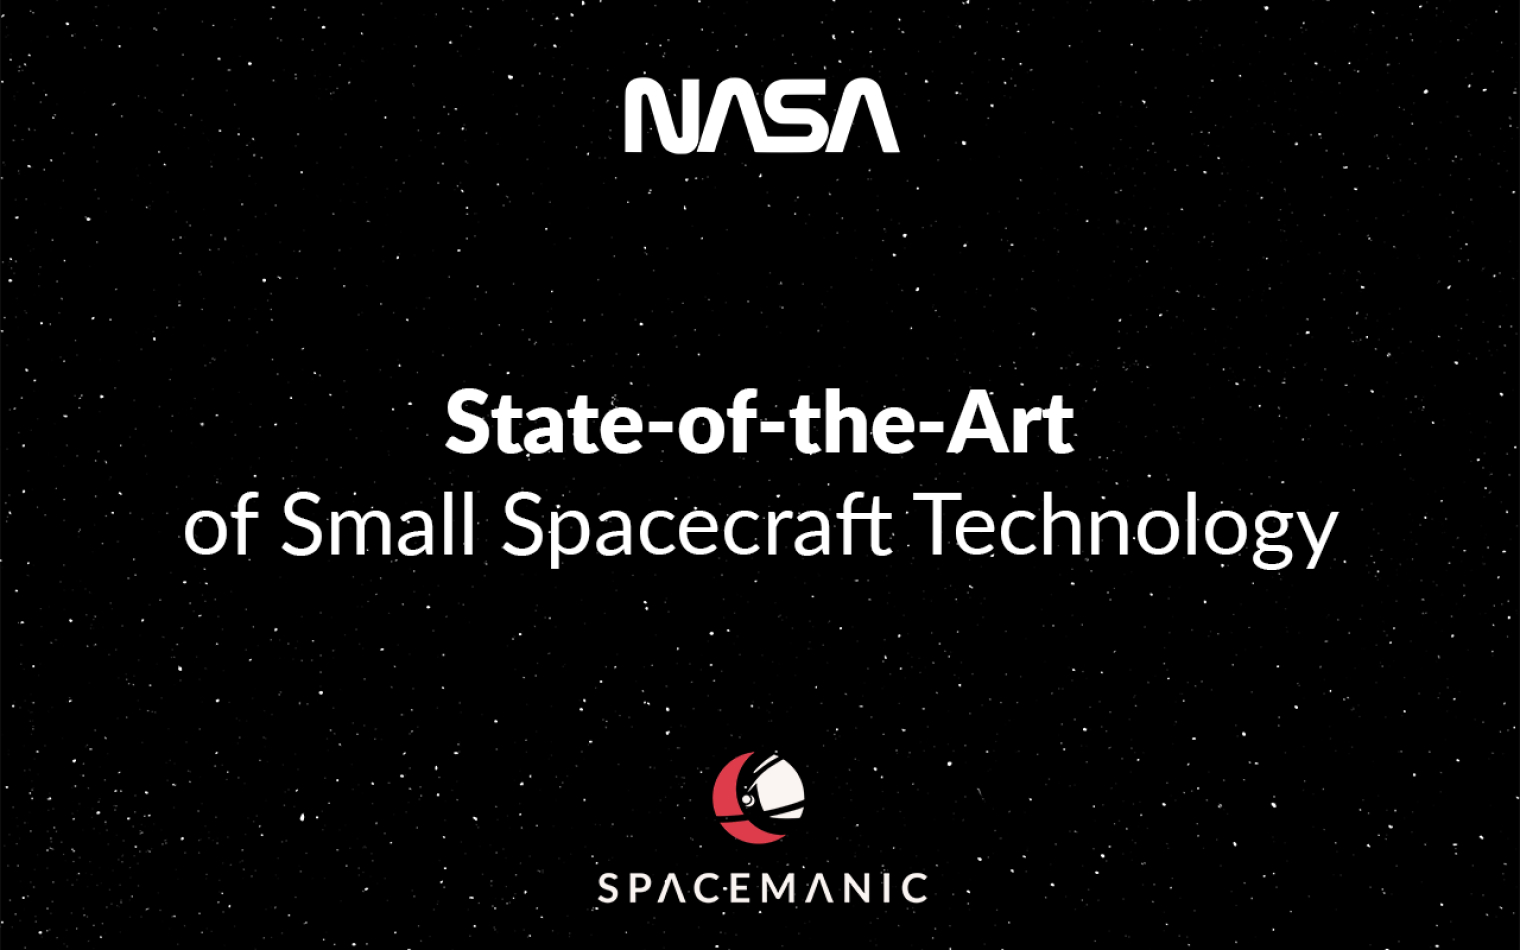 NASA State-of-the-Art of Small Spacecraft Technology